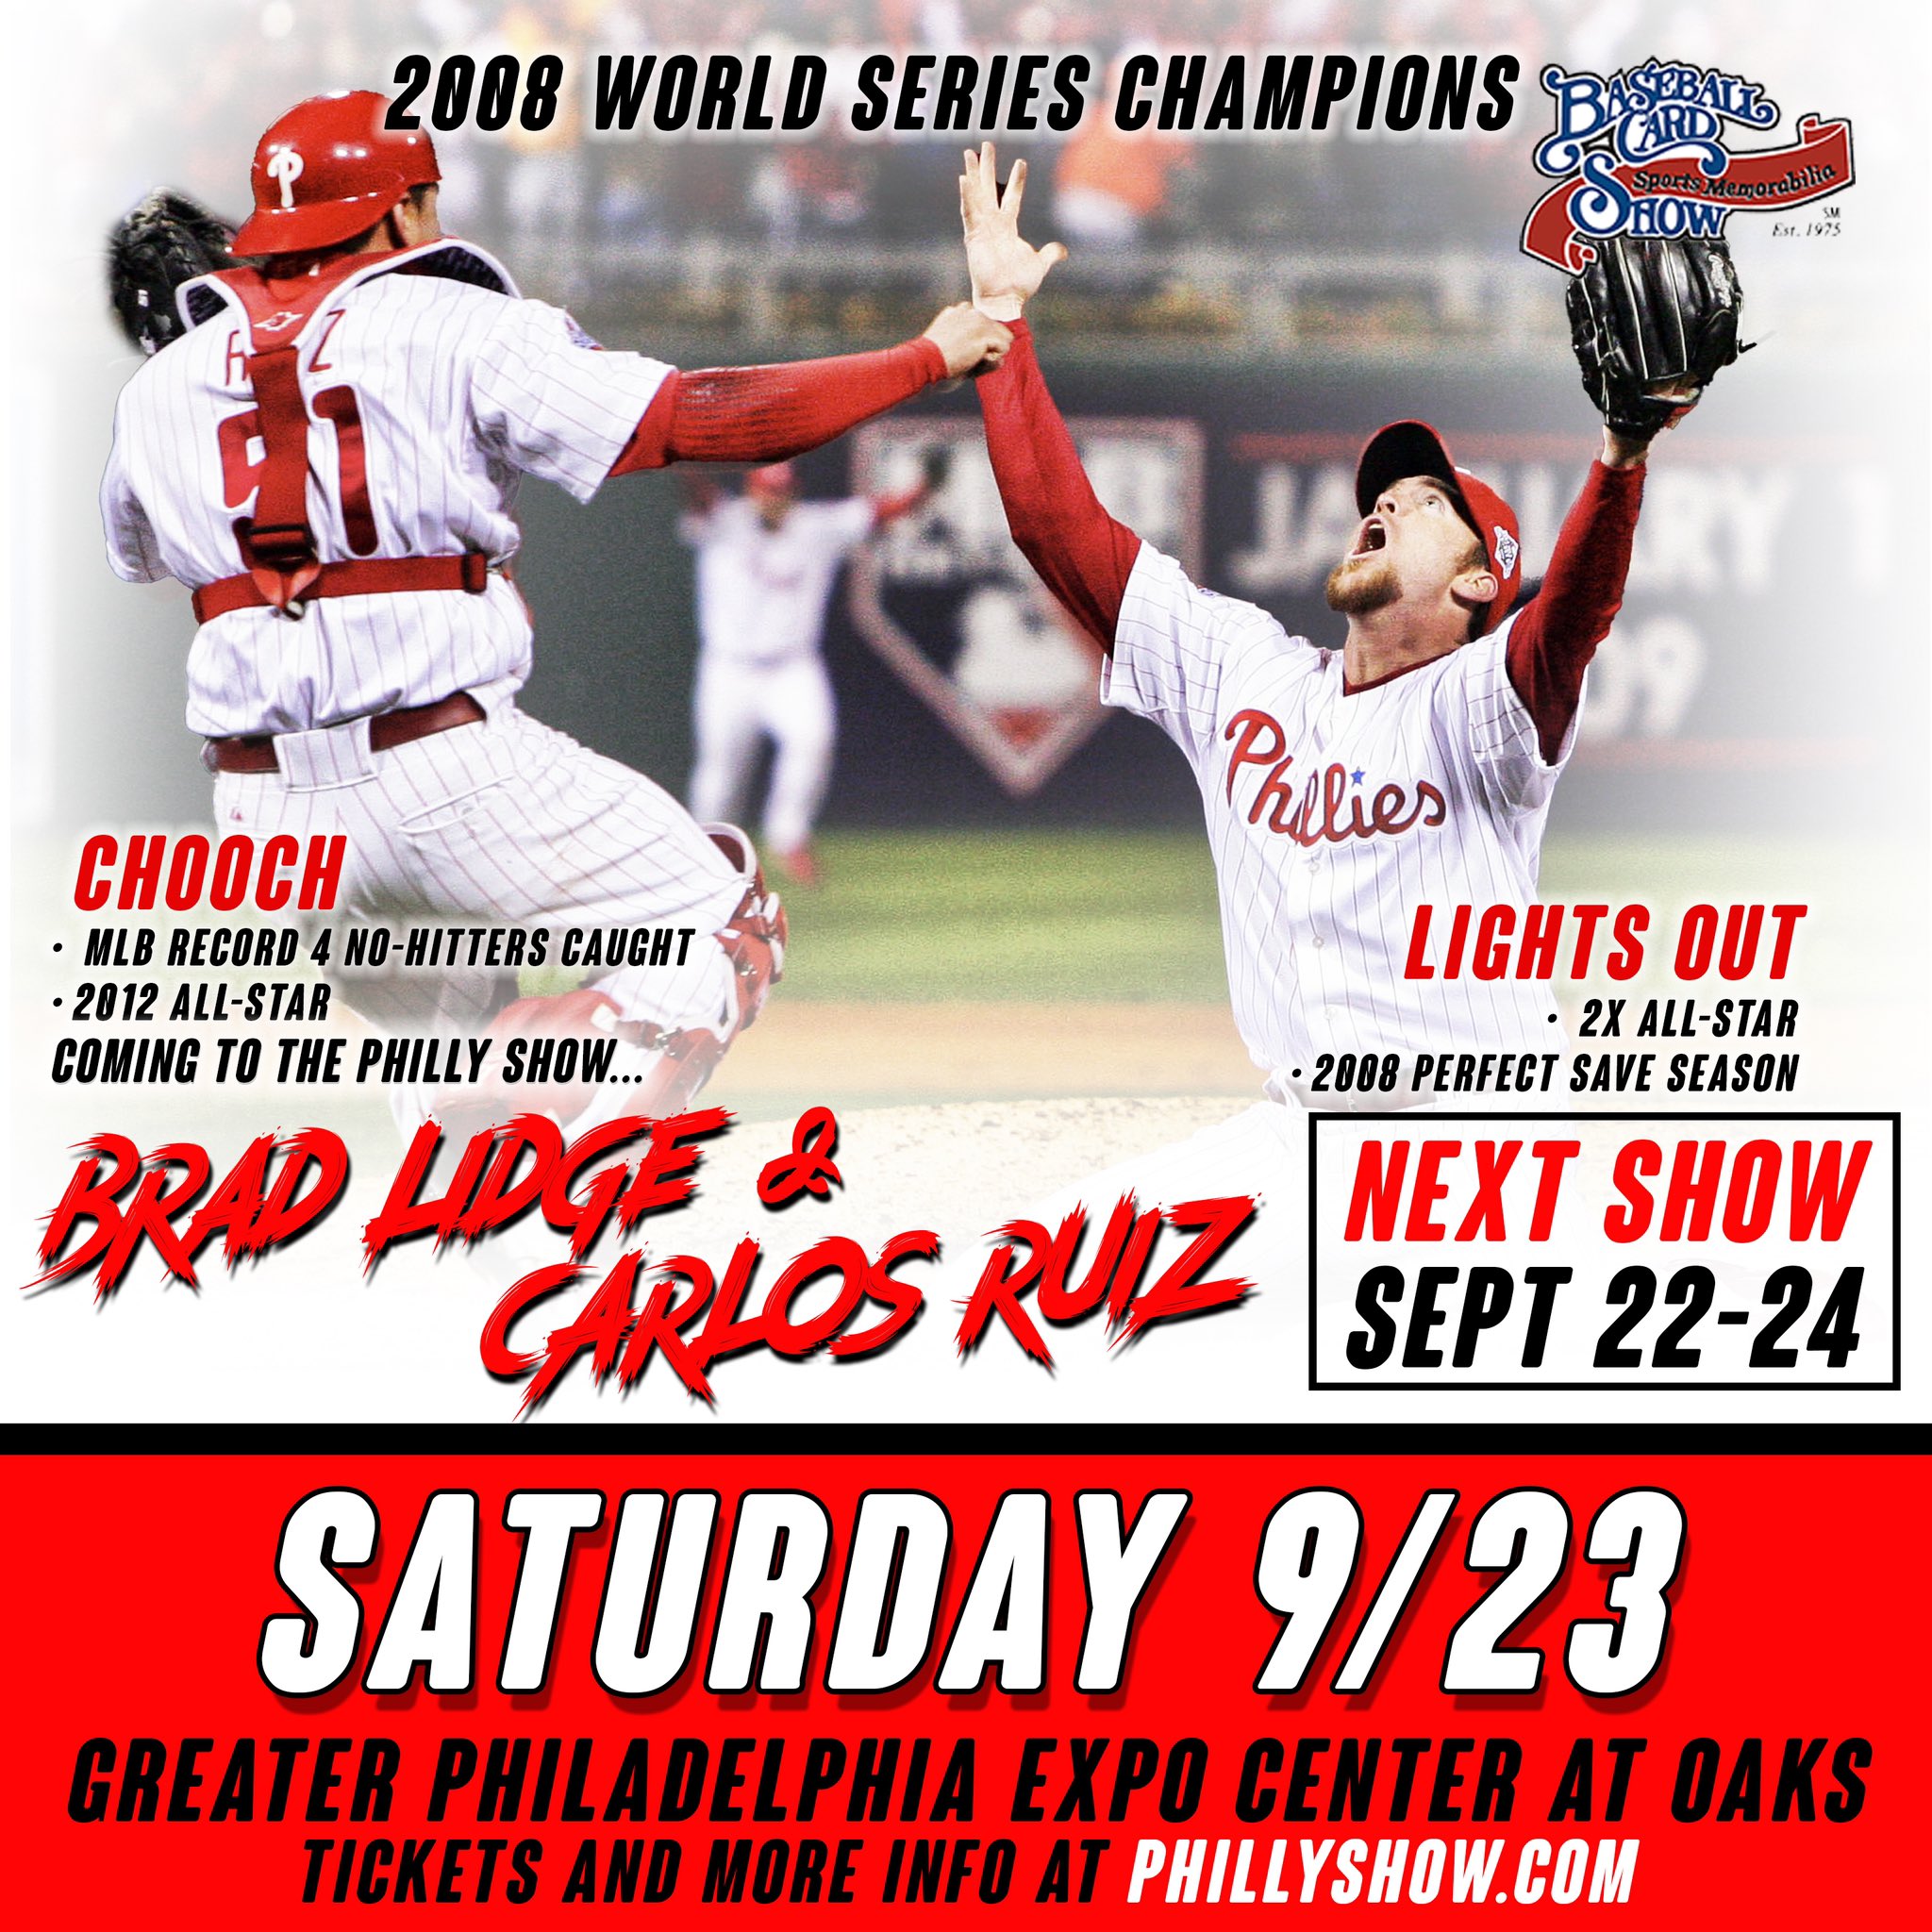 The Philly Show on X: Brad Lidge and Carlos Ruiz will be at the September  Philly Show! More coming! #phillyshow #phillies #worldseries  #worldserieswinners #standby #getready #bradlidge #carlosruiz  #philliesbaseball #allstar #chooch #lightsout https